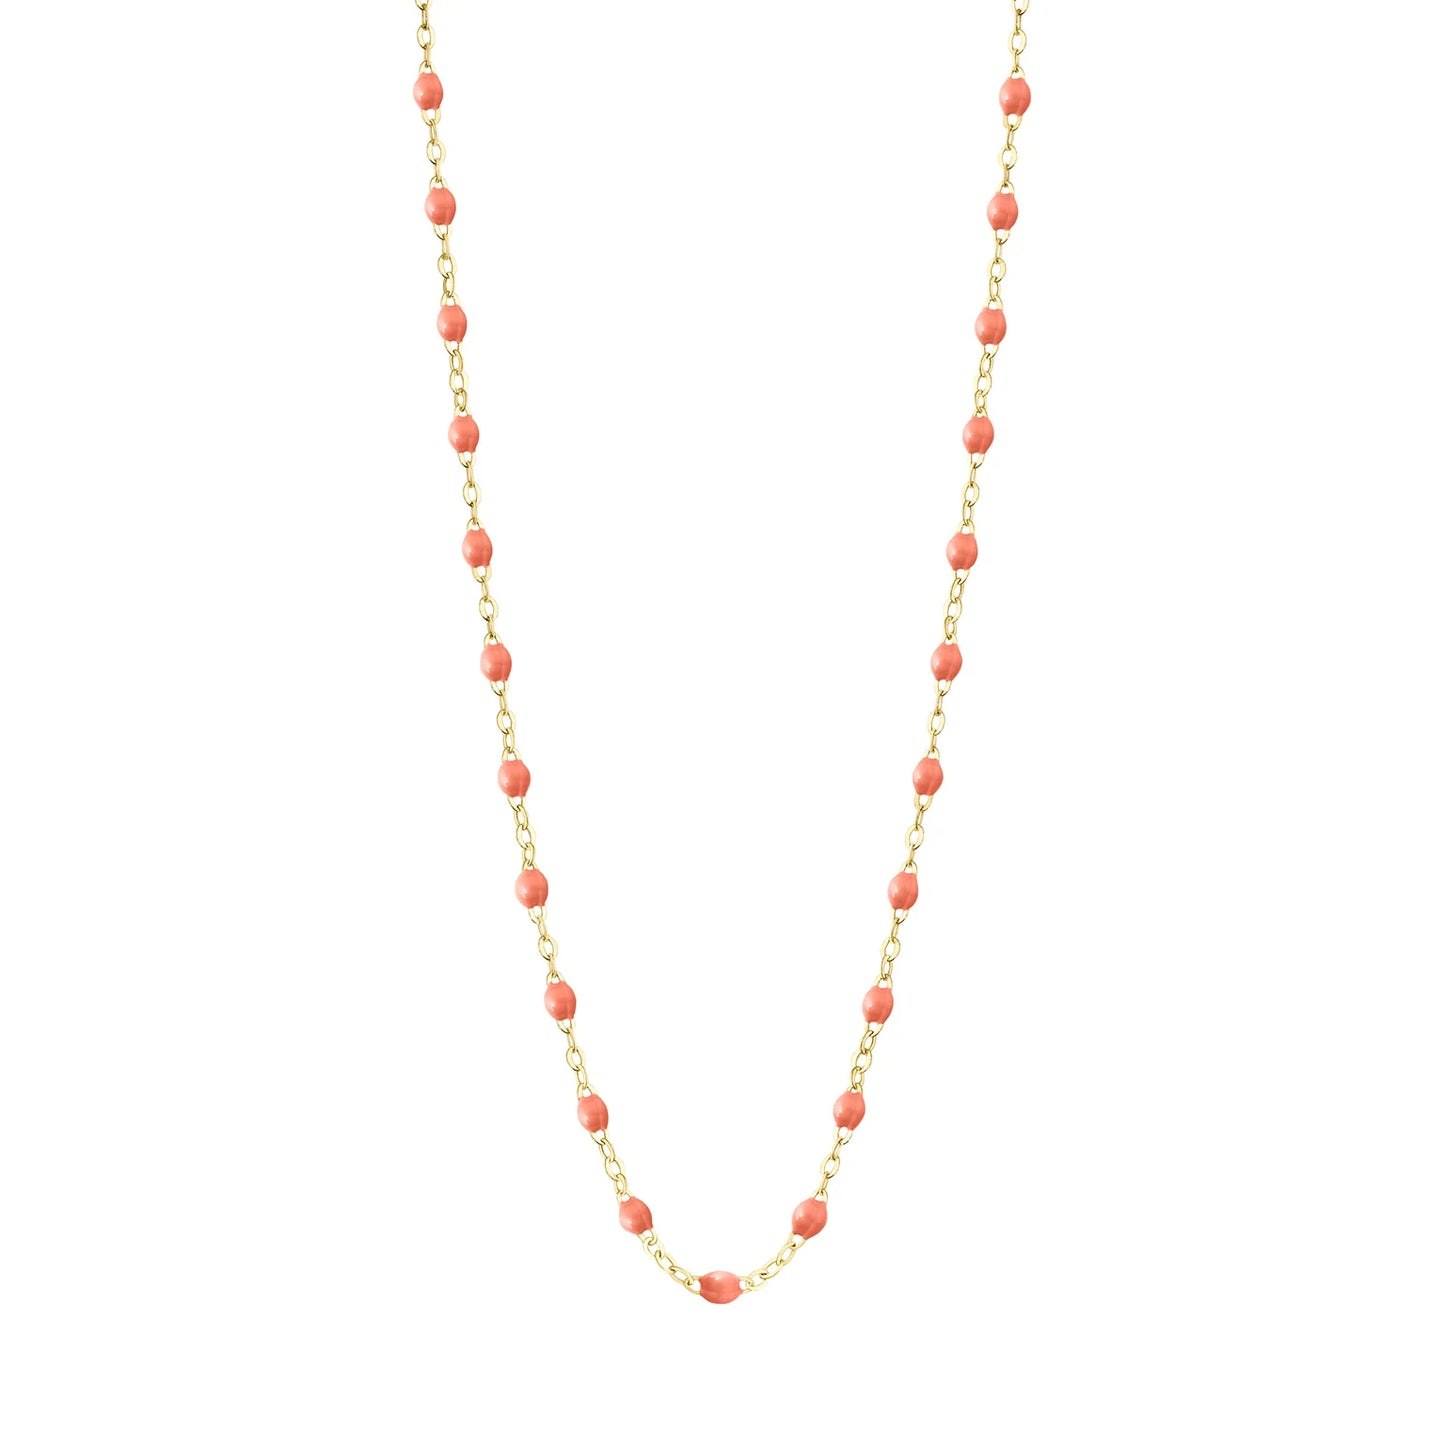 Giselle Necklace - Salmon